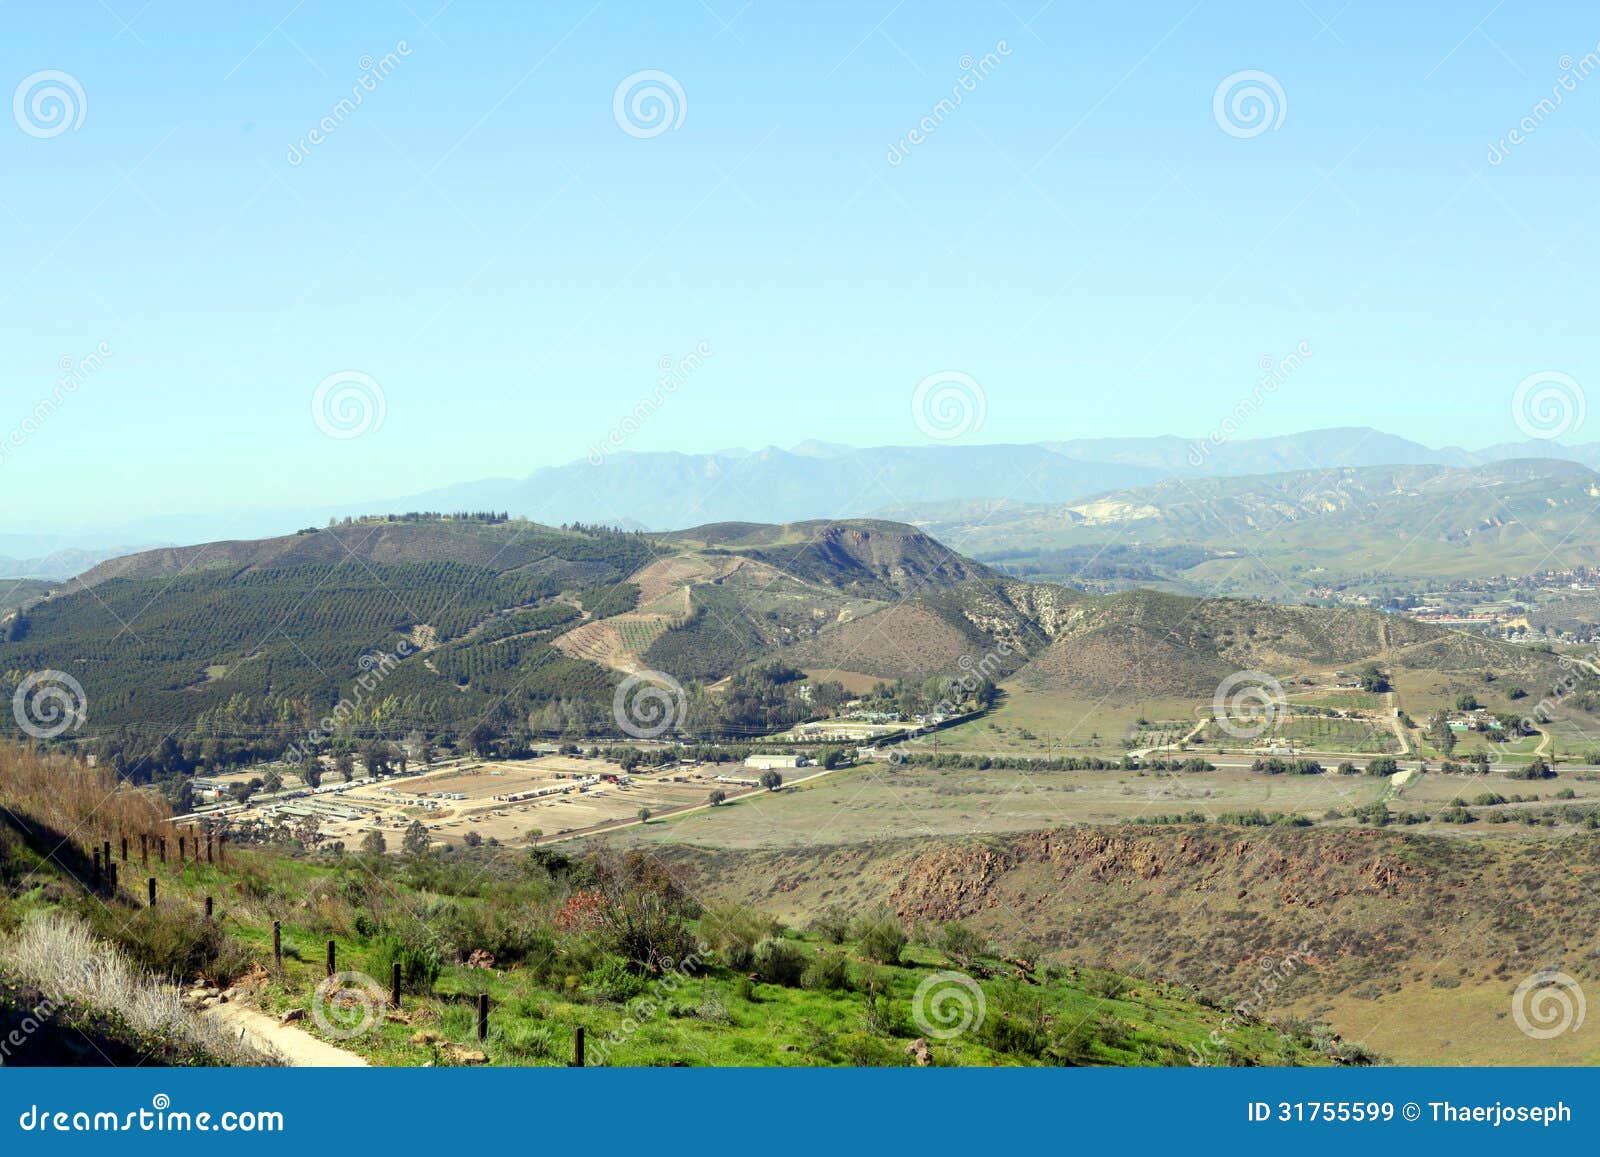 Simi Valley Landscape Royalty Free Stock Images - Image: 31755599